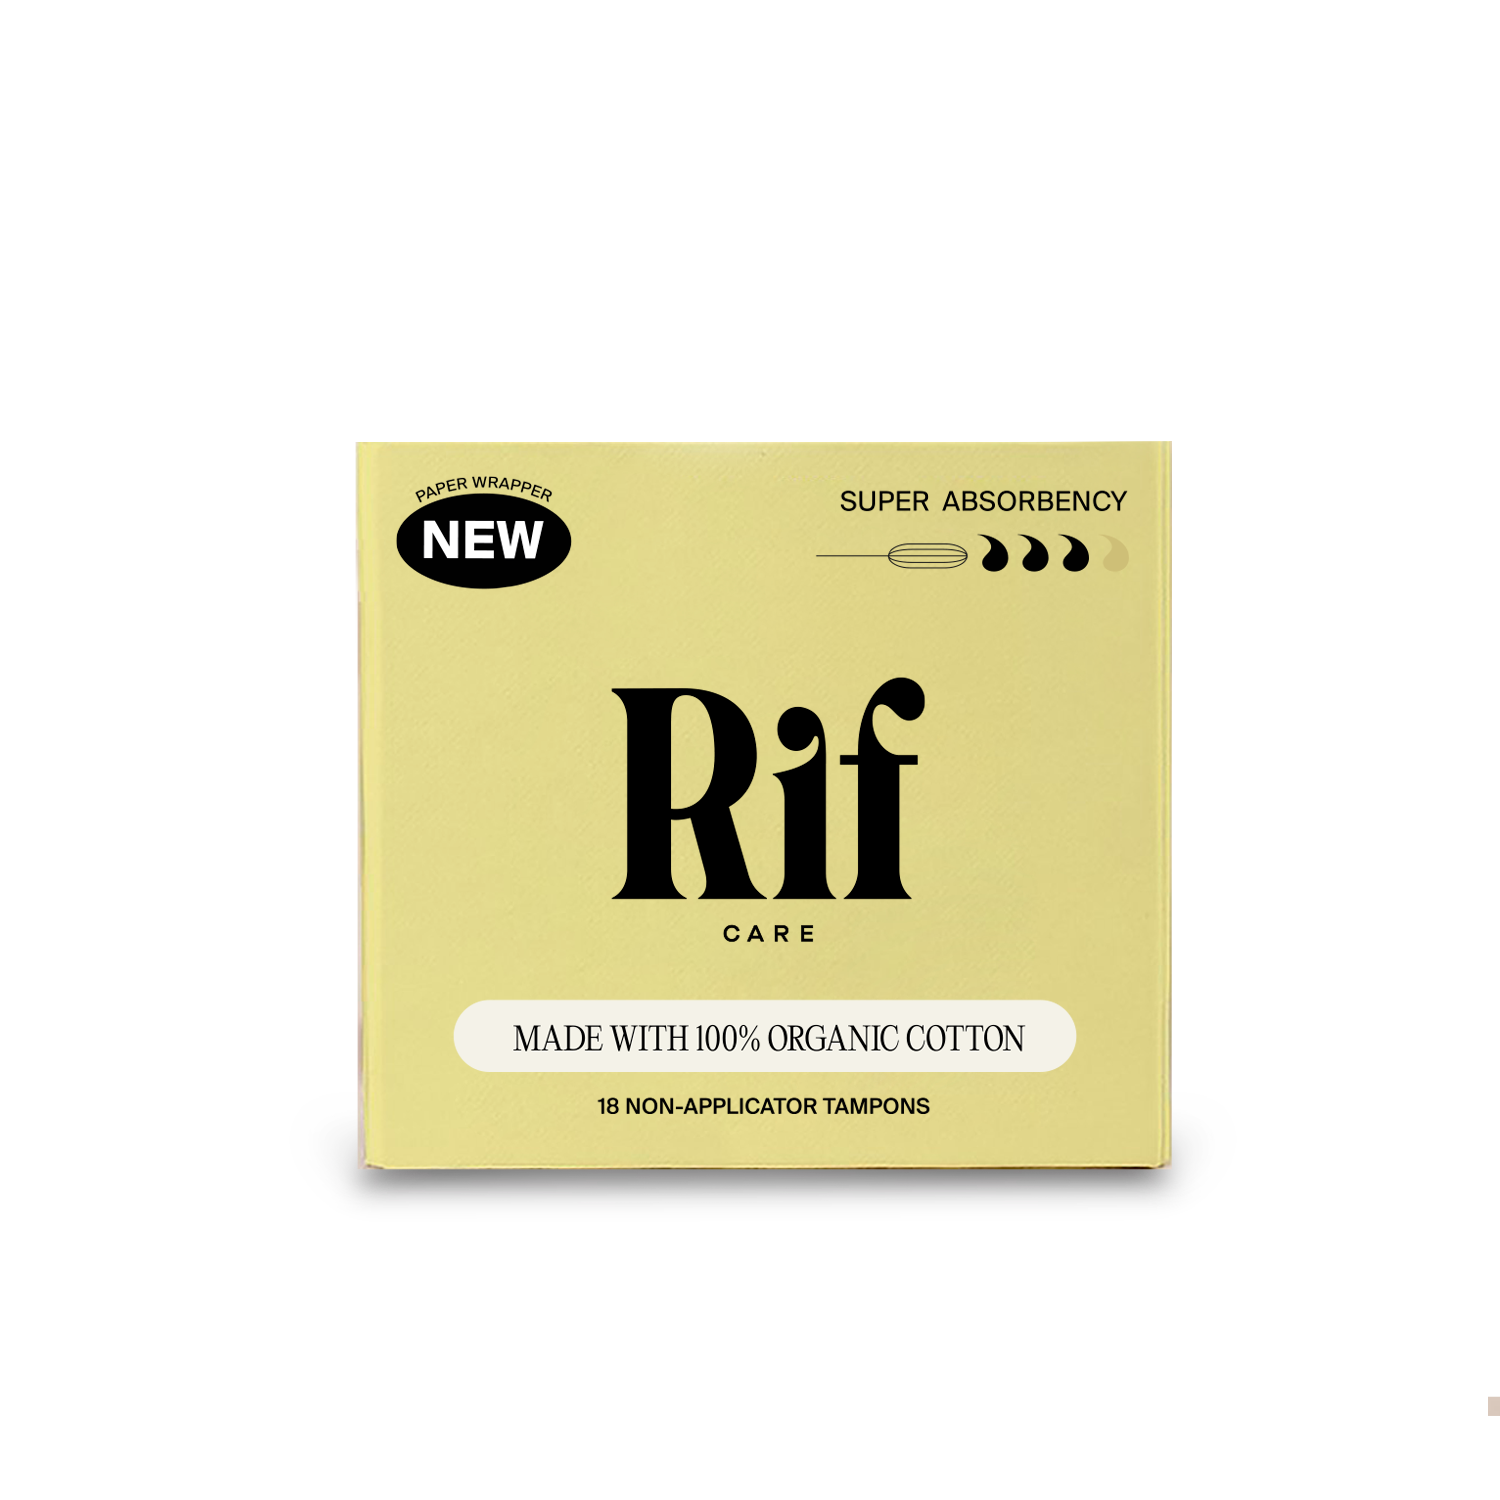 Rif Care 100% Organic Cotton Super Absorbency Tampons with No Applicator  18-count